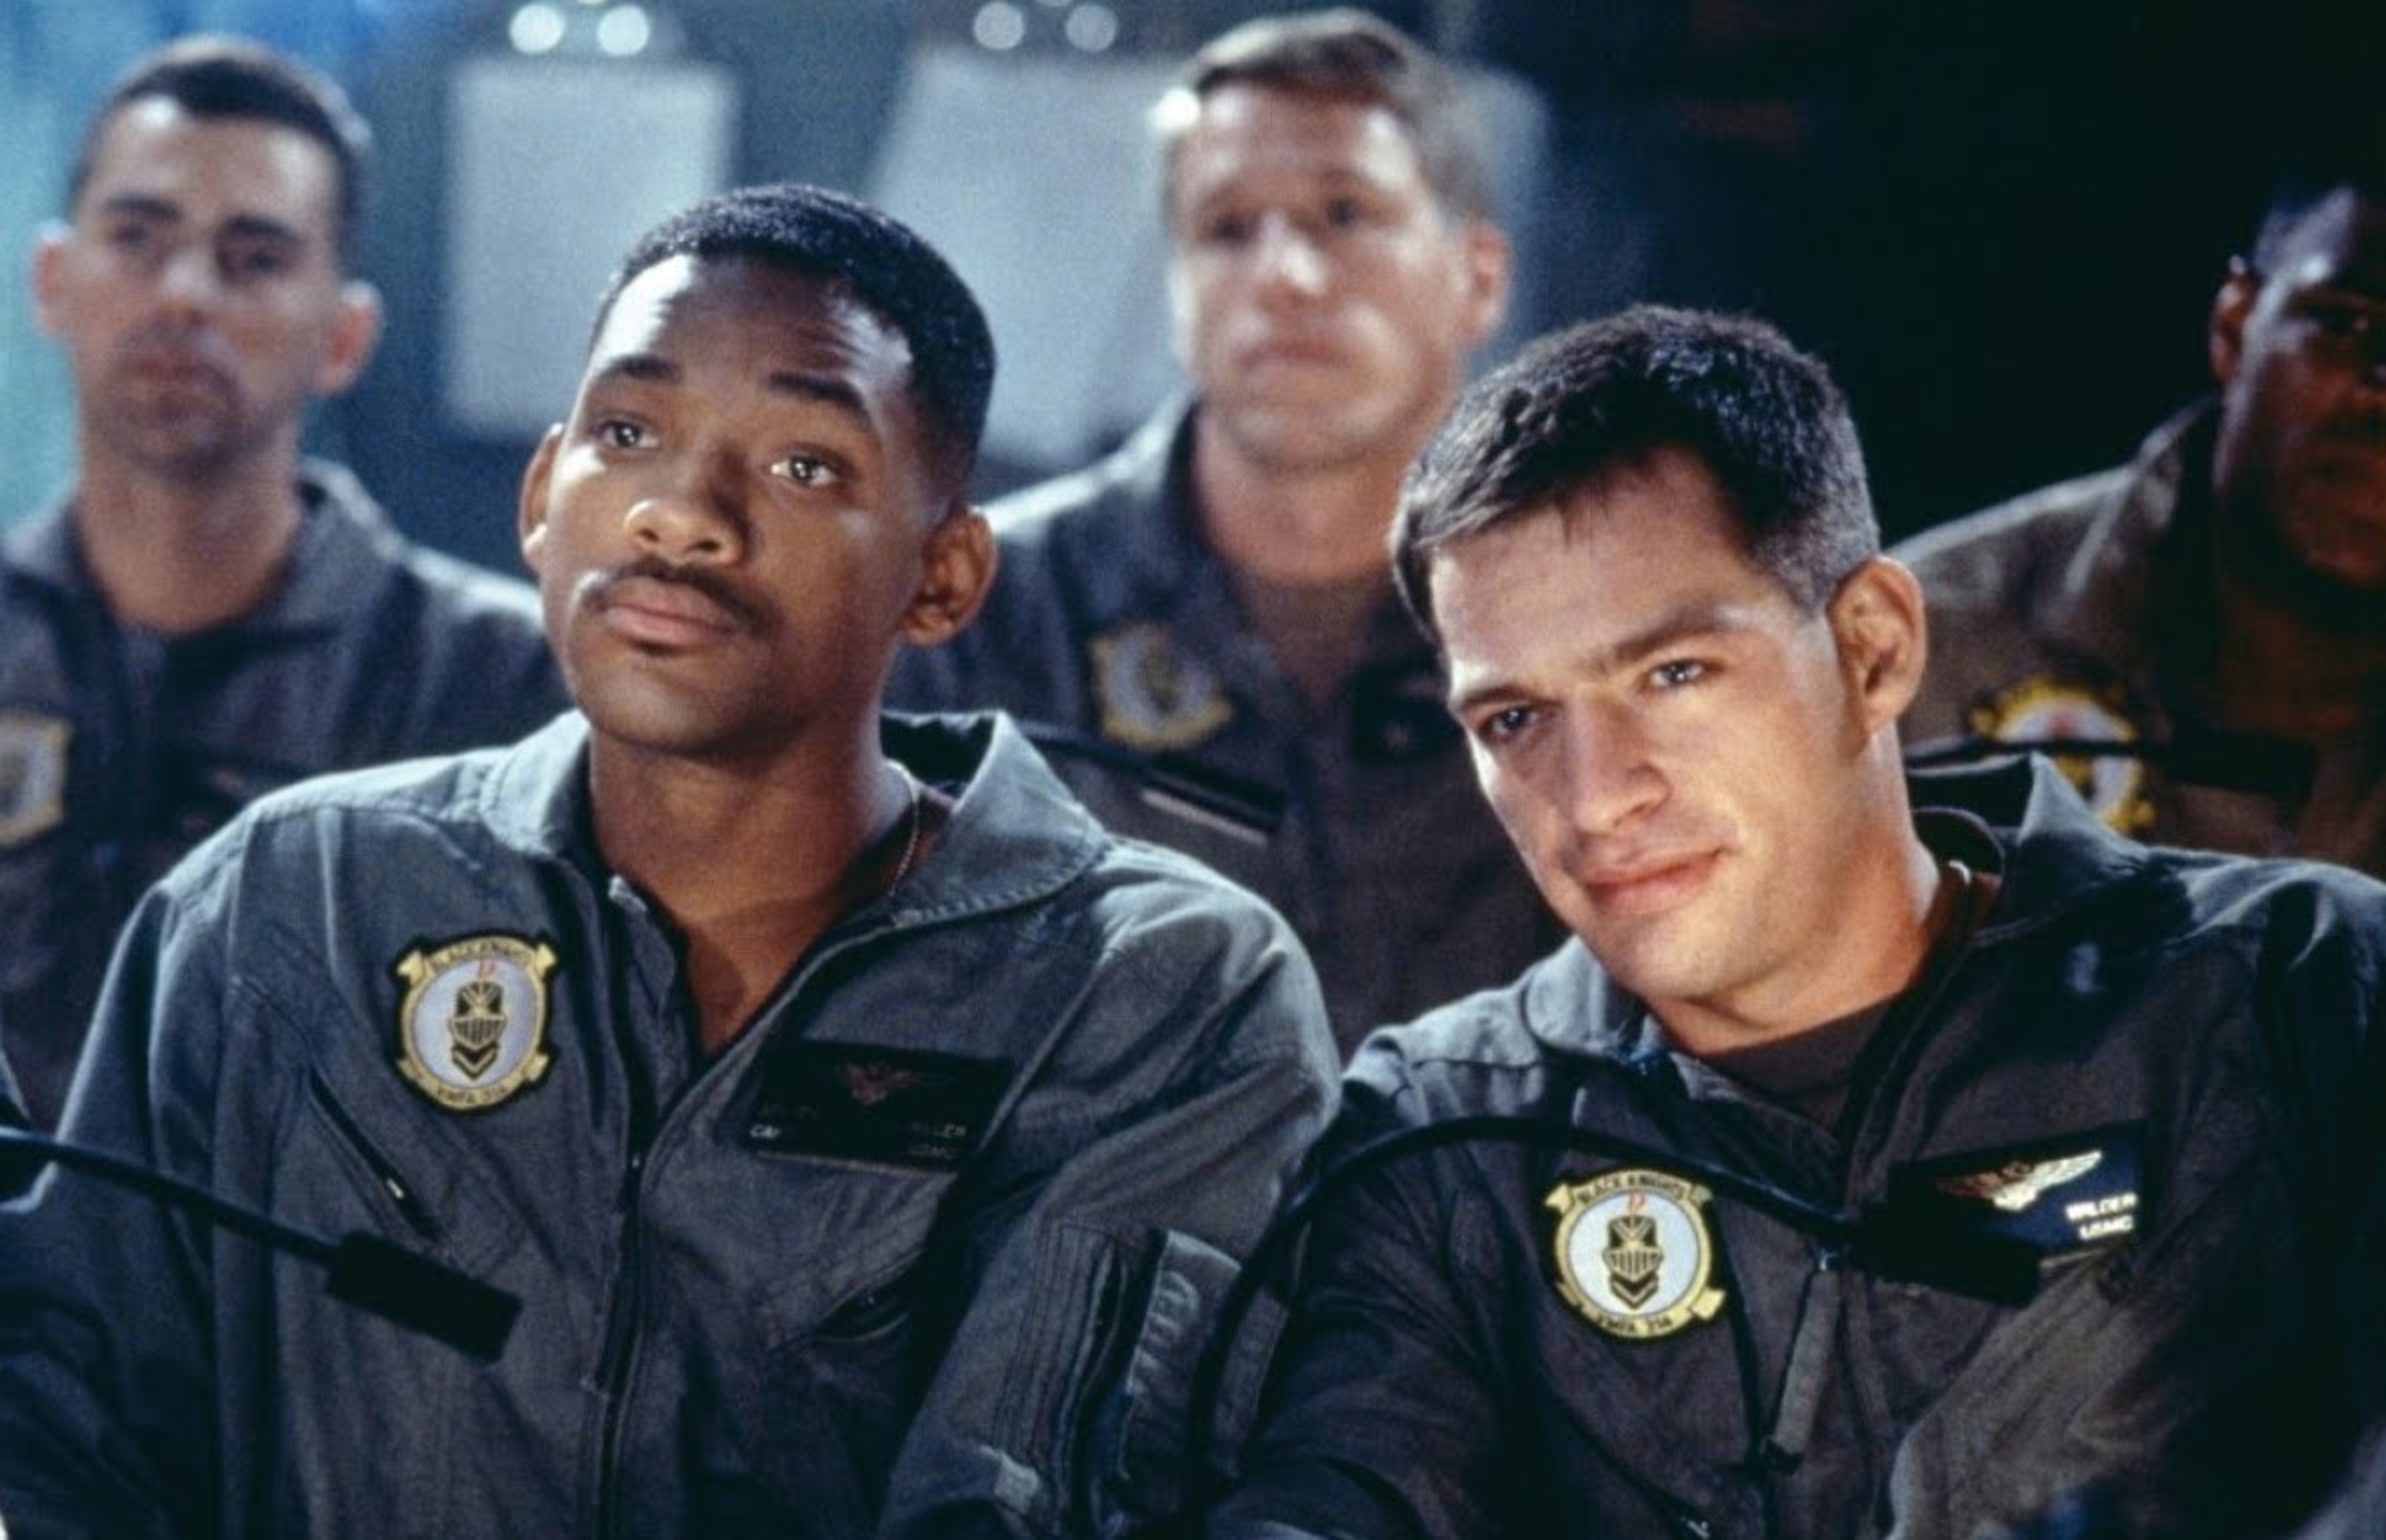 <p>There are a few different pilots in “Independence Day,” and we aren’t talking about the aliens piloting those spacecraft (we stuck to Earth-based flying machines here). Randy Quaid flies a crop duster but returns to a military plane to save the day. Will Smith is a pilot, of course, and even the President gets back behind the wheel of an airplane to fight off the alien invaders.</p><p><a href='https://www.msn.com/en-us/community/channel/vid-cj9pqbr0vn9in2b6ddcd8sfgpfq6x6utp44fssrv6mc2gtybw0us'>Follow us on MSN to see more of our exclusive entertainment content.</a></p>